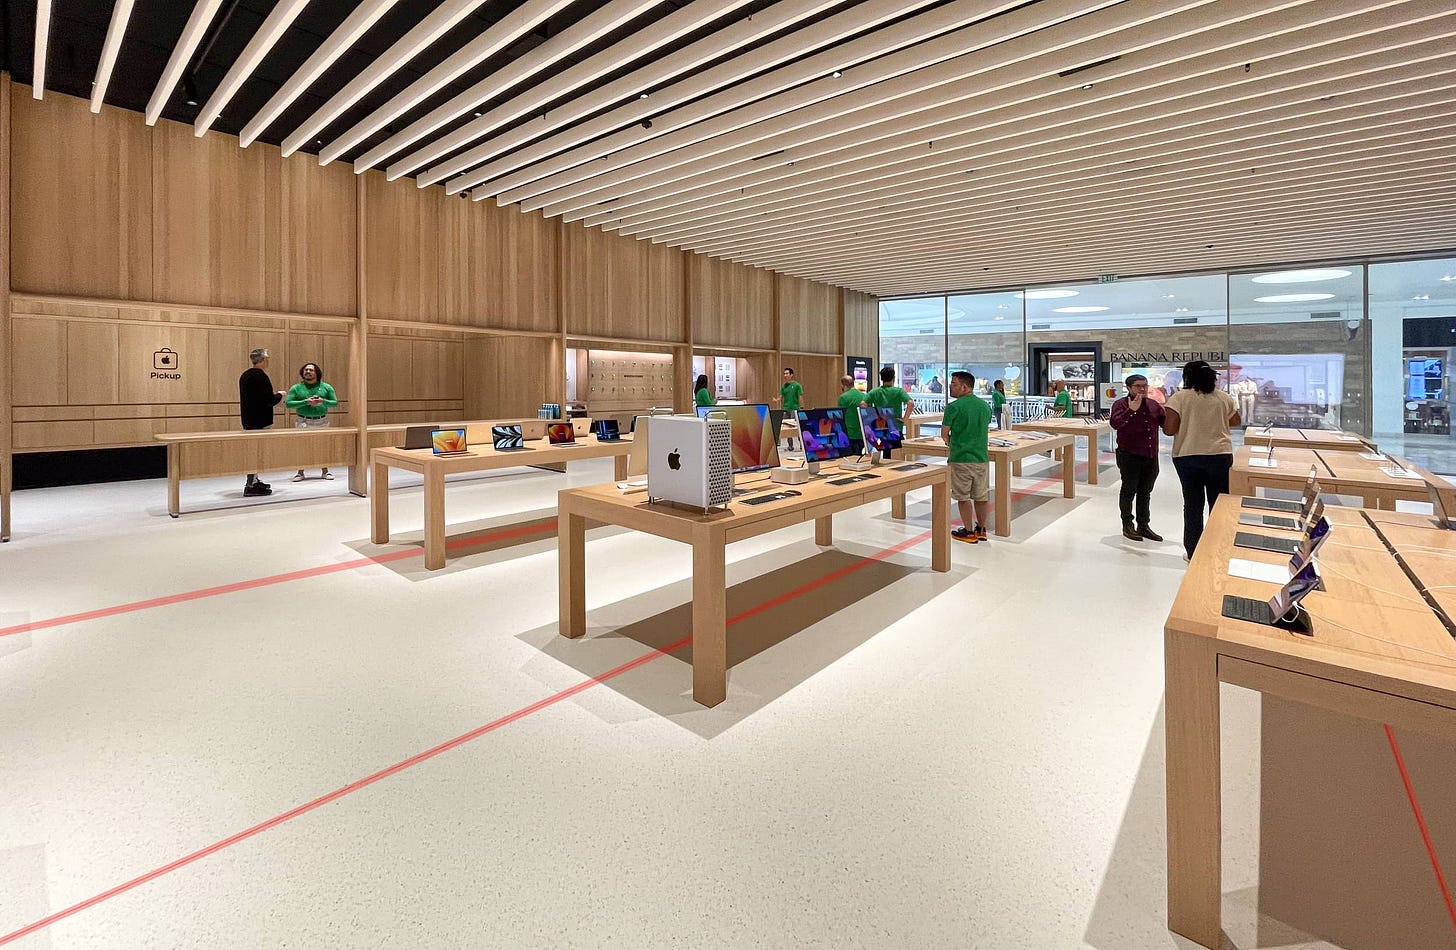 The interior of Apple Tysons Corner. Red lines superimposed over the floor highlight dividers in the terrazzo.